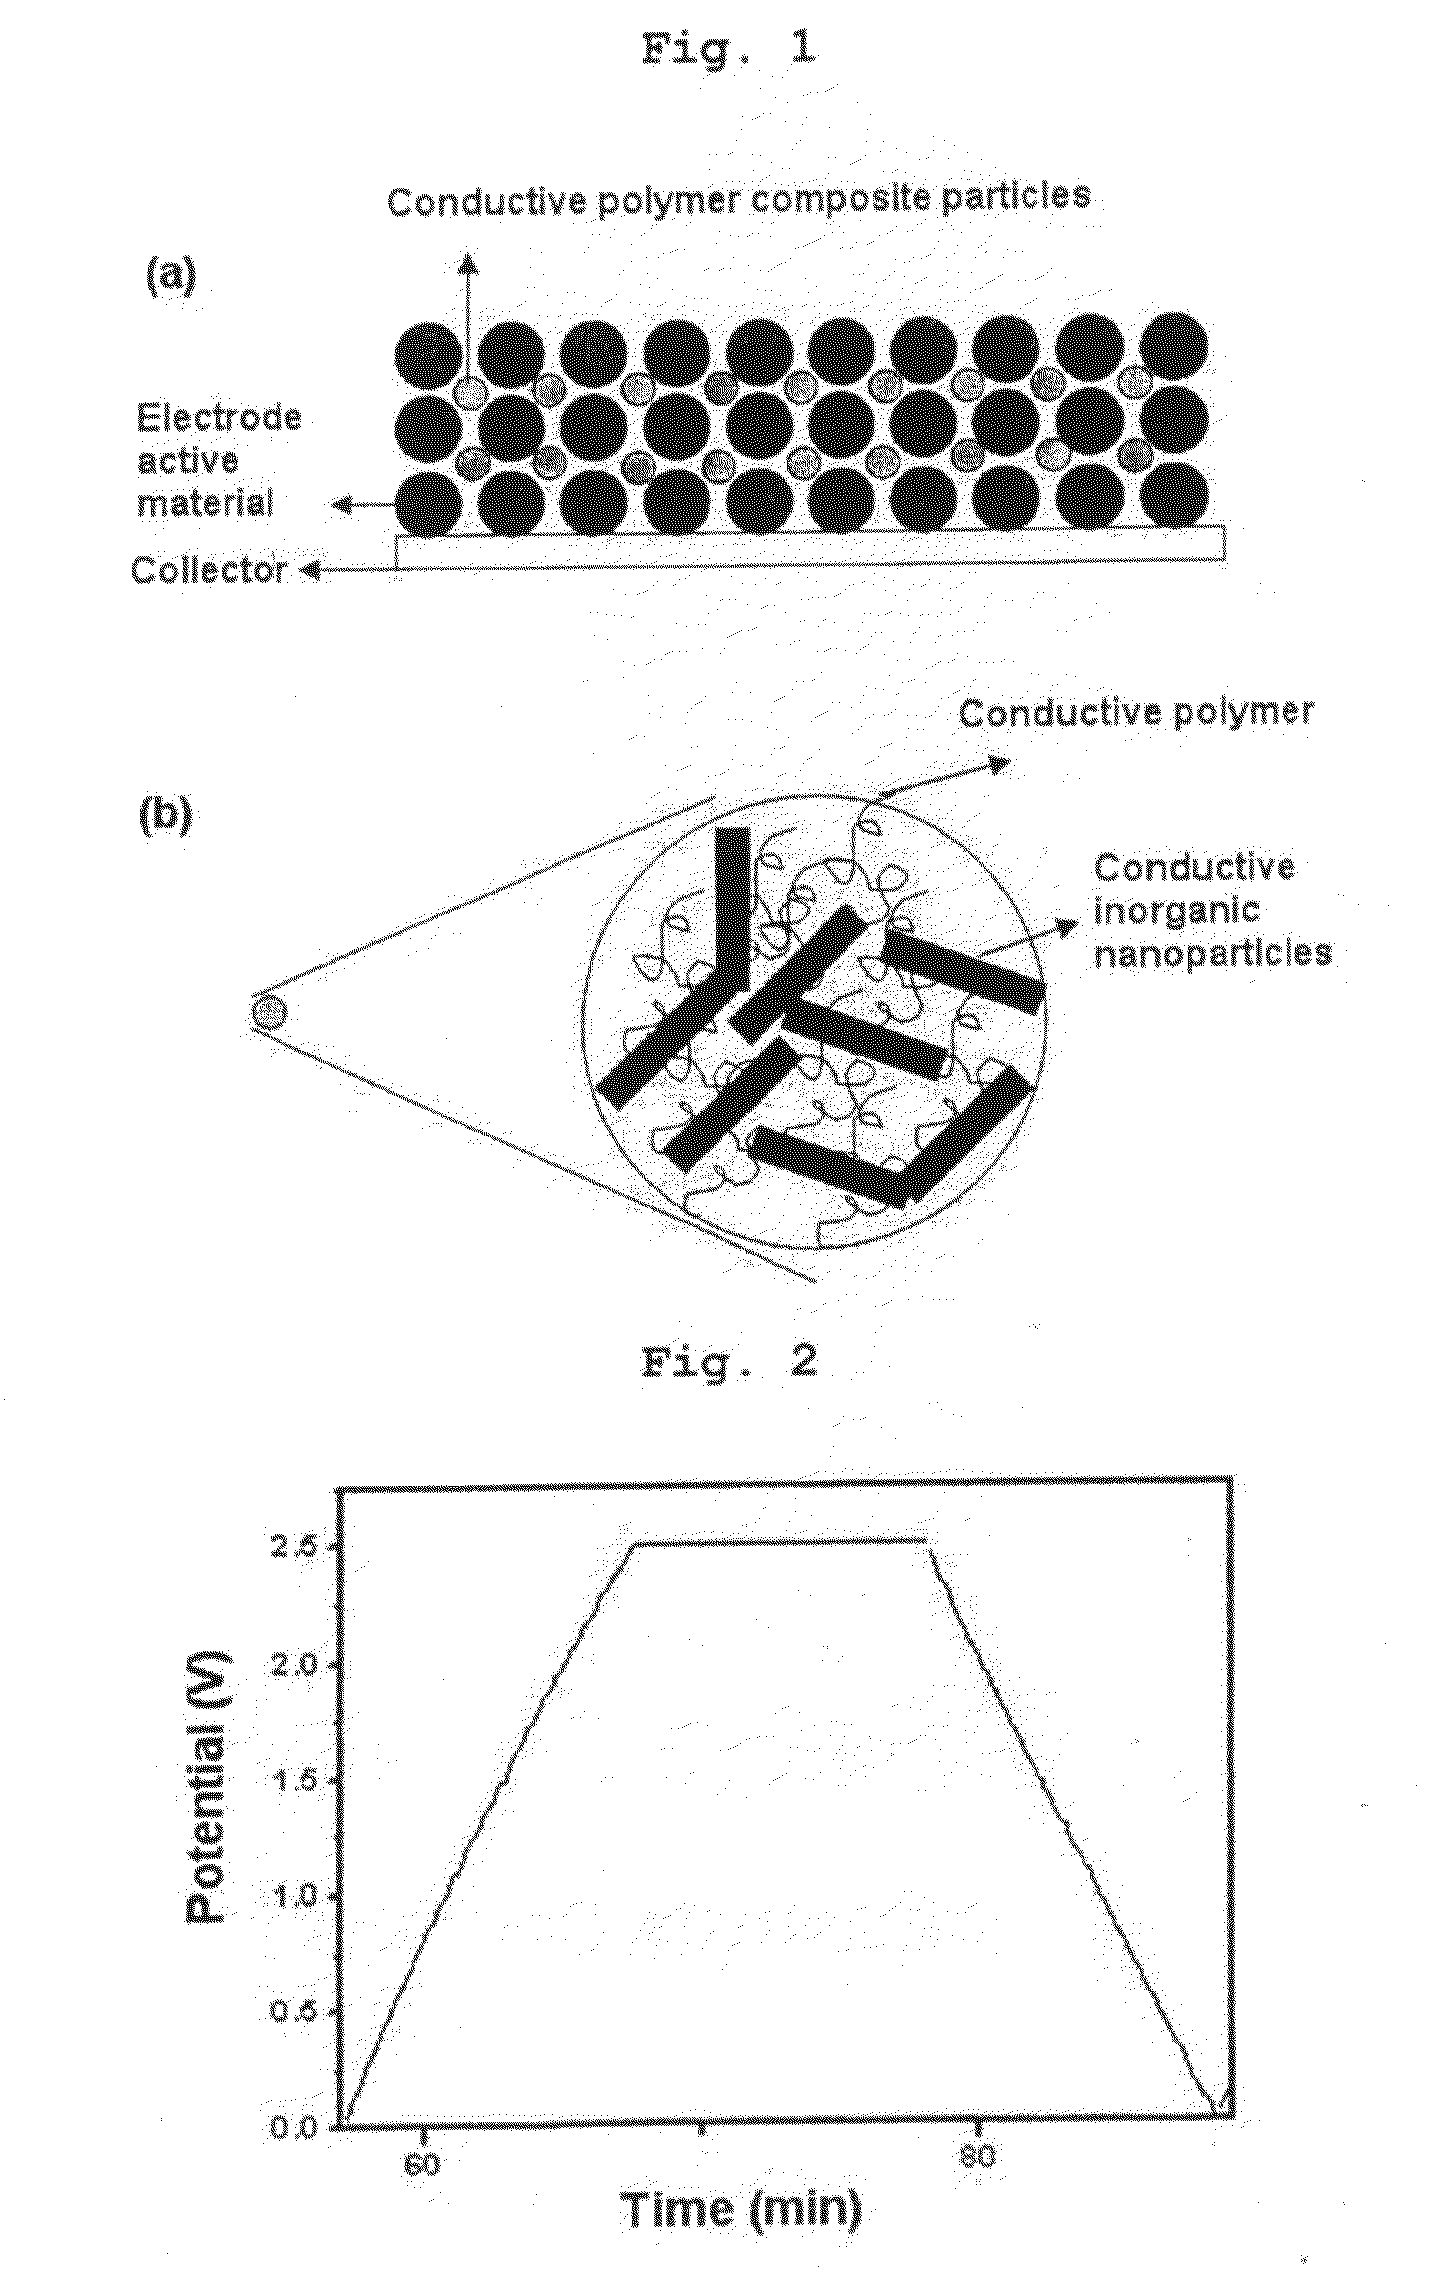 Electrochemical Energy Storage Device with High Capacity and High Power Using Conductive Polymer Composite